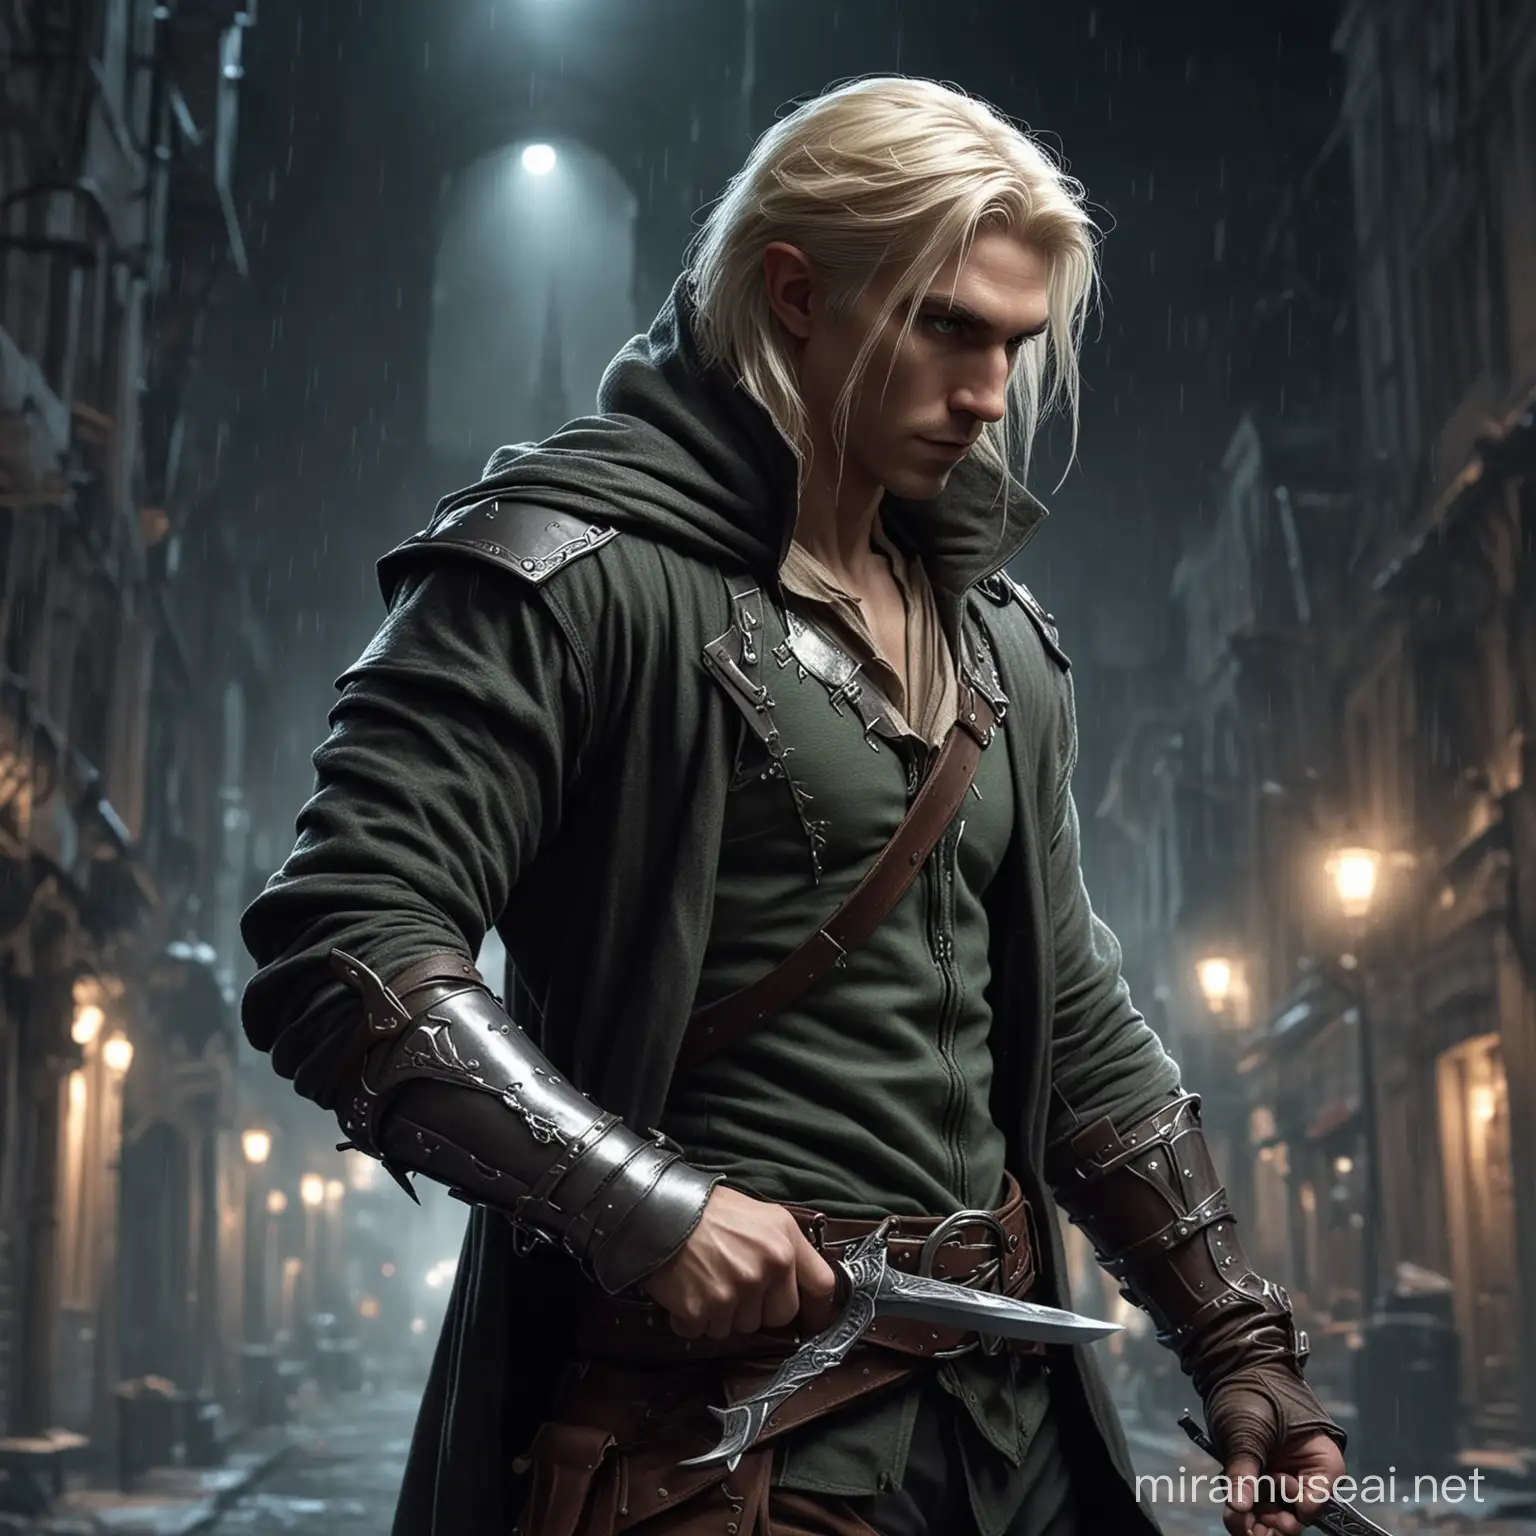 Stealthy Blond Elf Rogue Man Committing Theft with Blade in Fantasy City